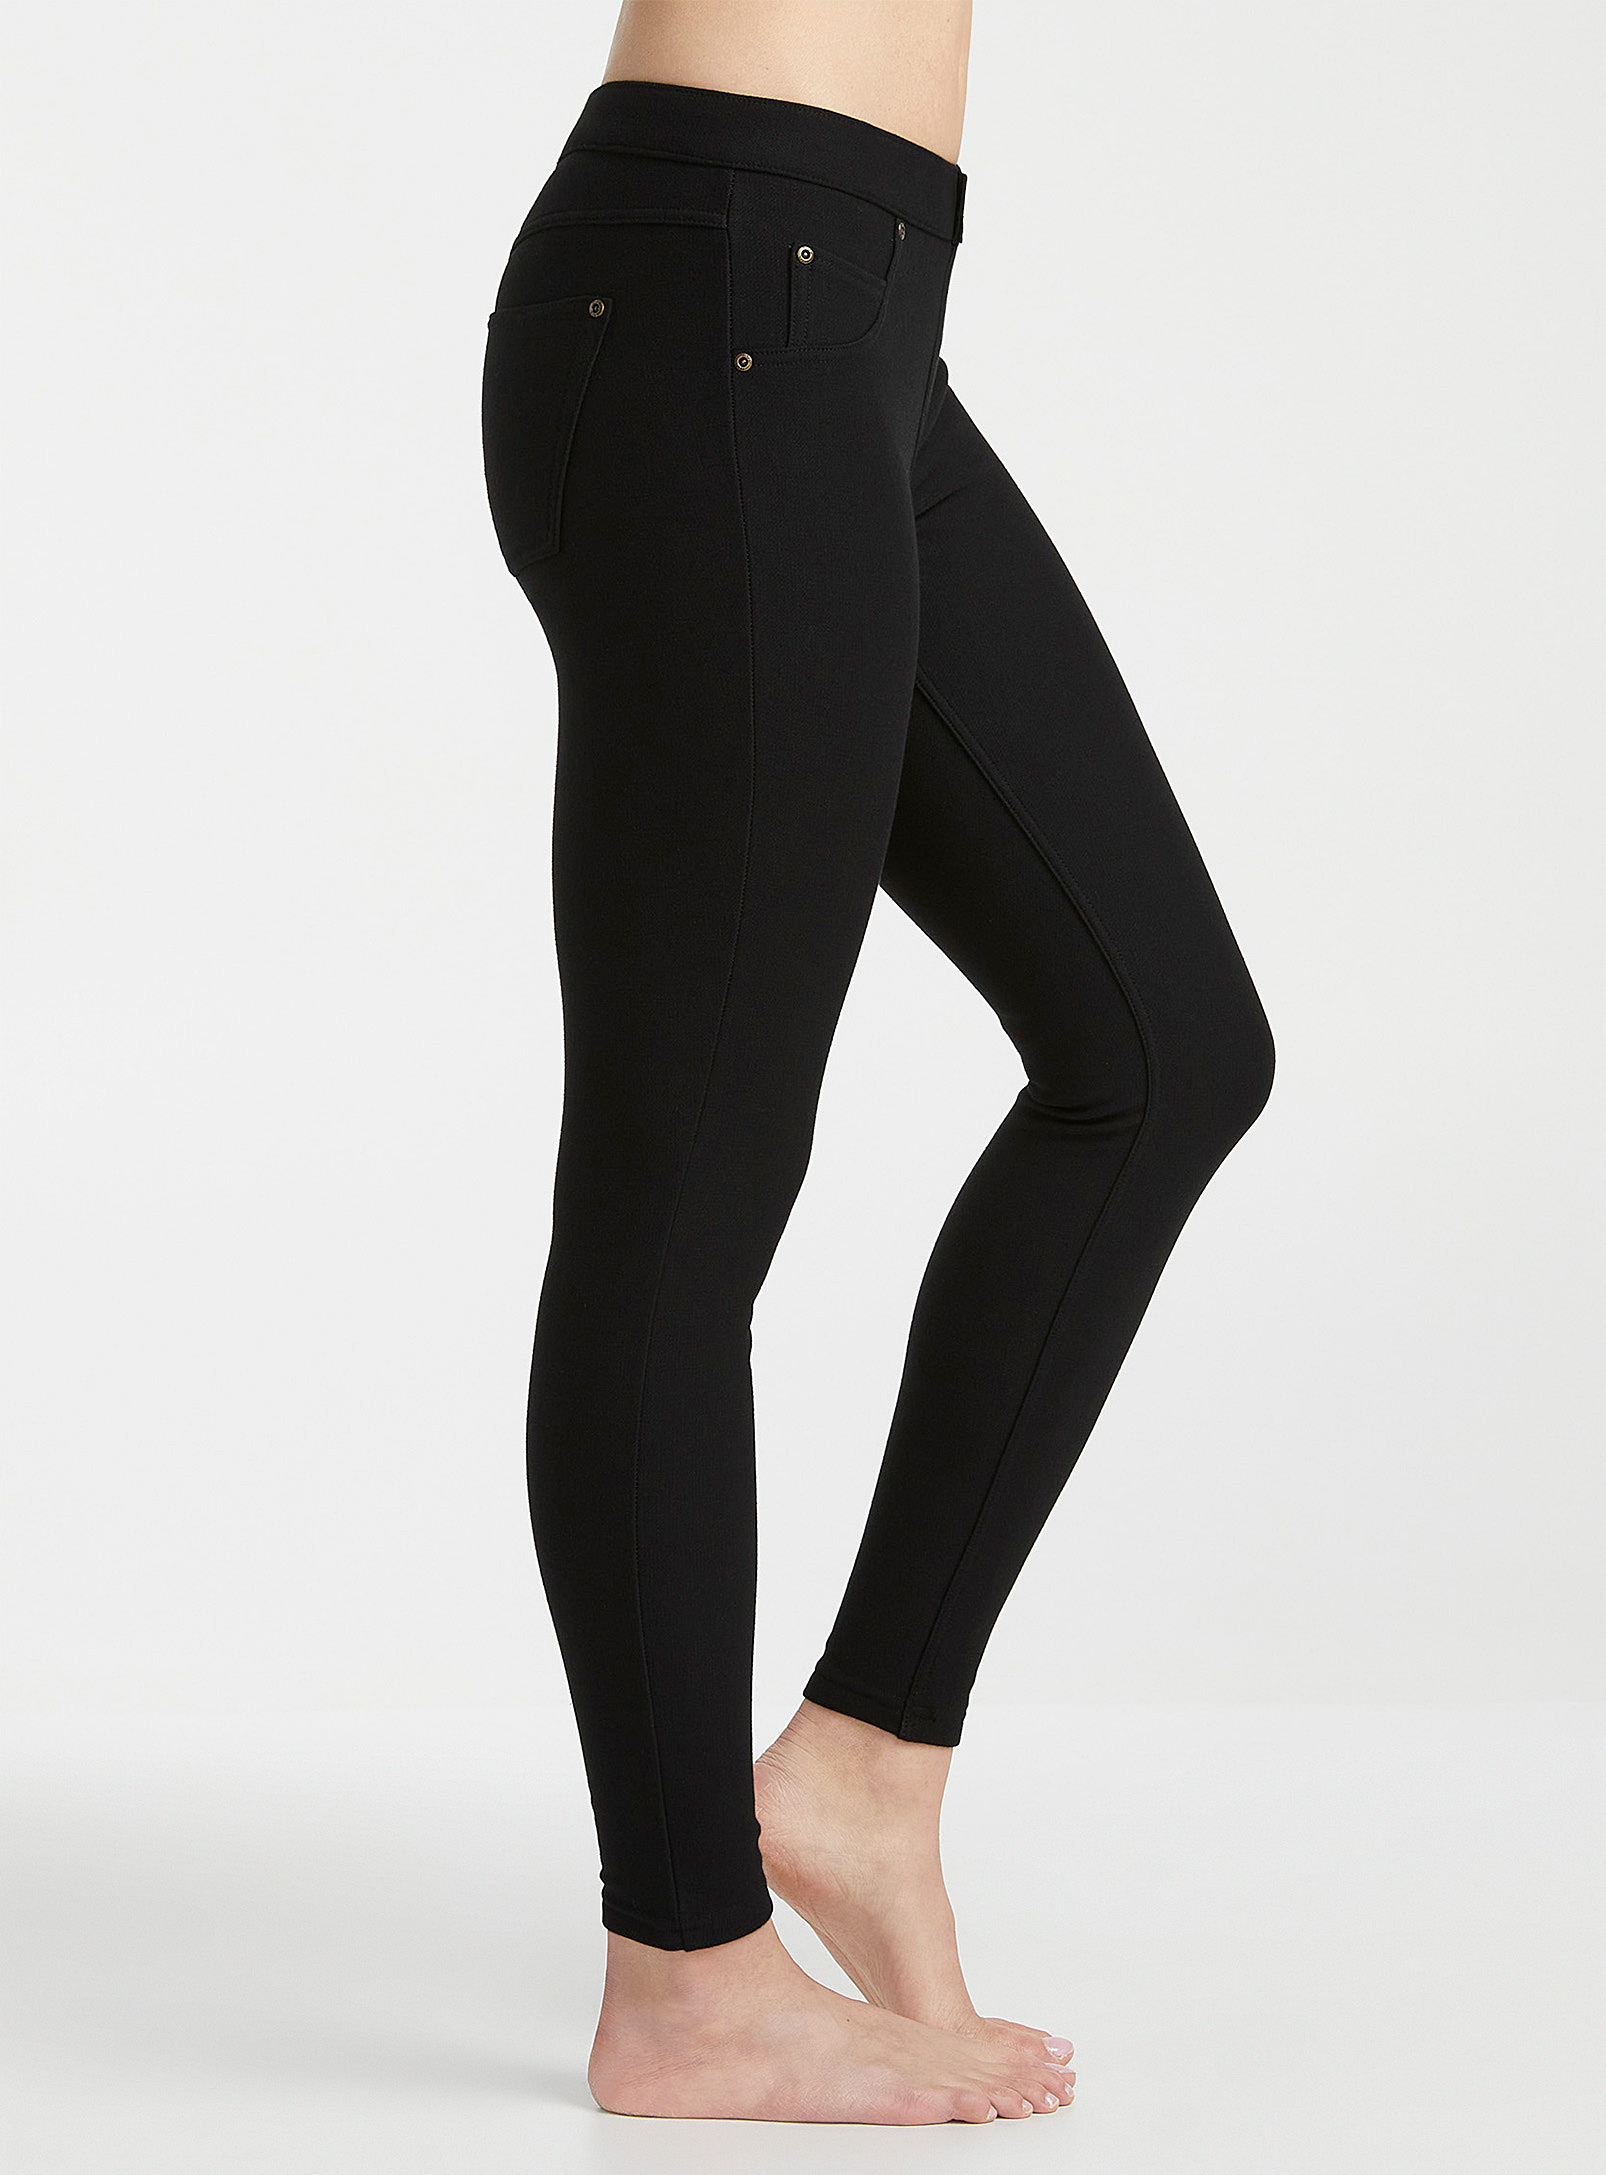 Buy Hue Women's Ultra Leggings with Wide Waistband, Graphite